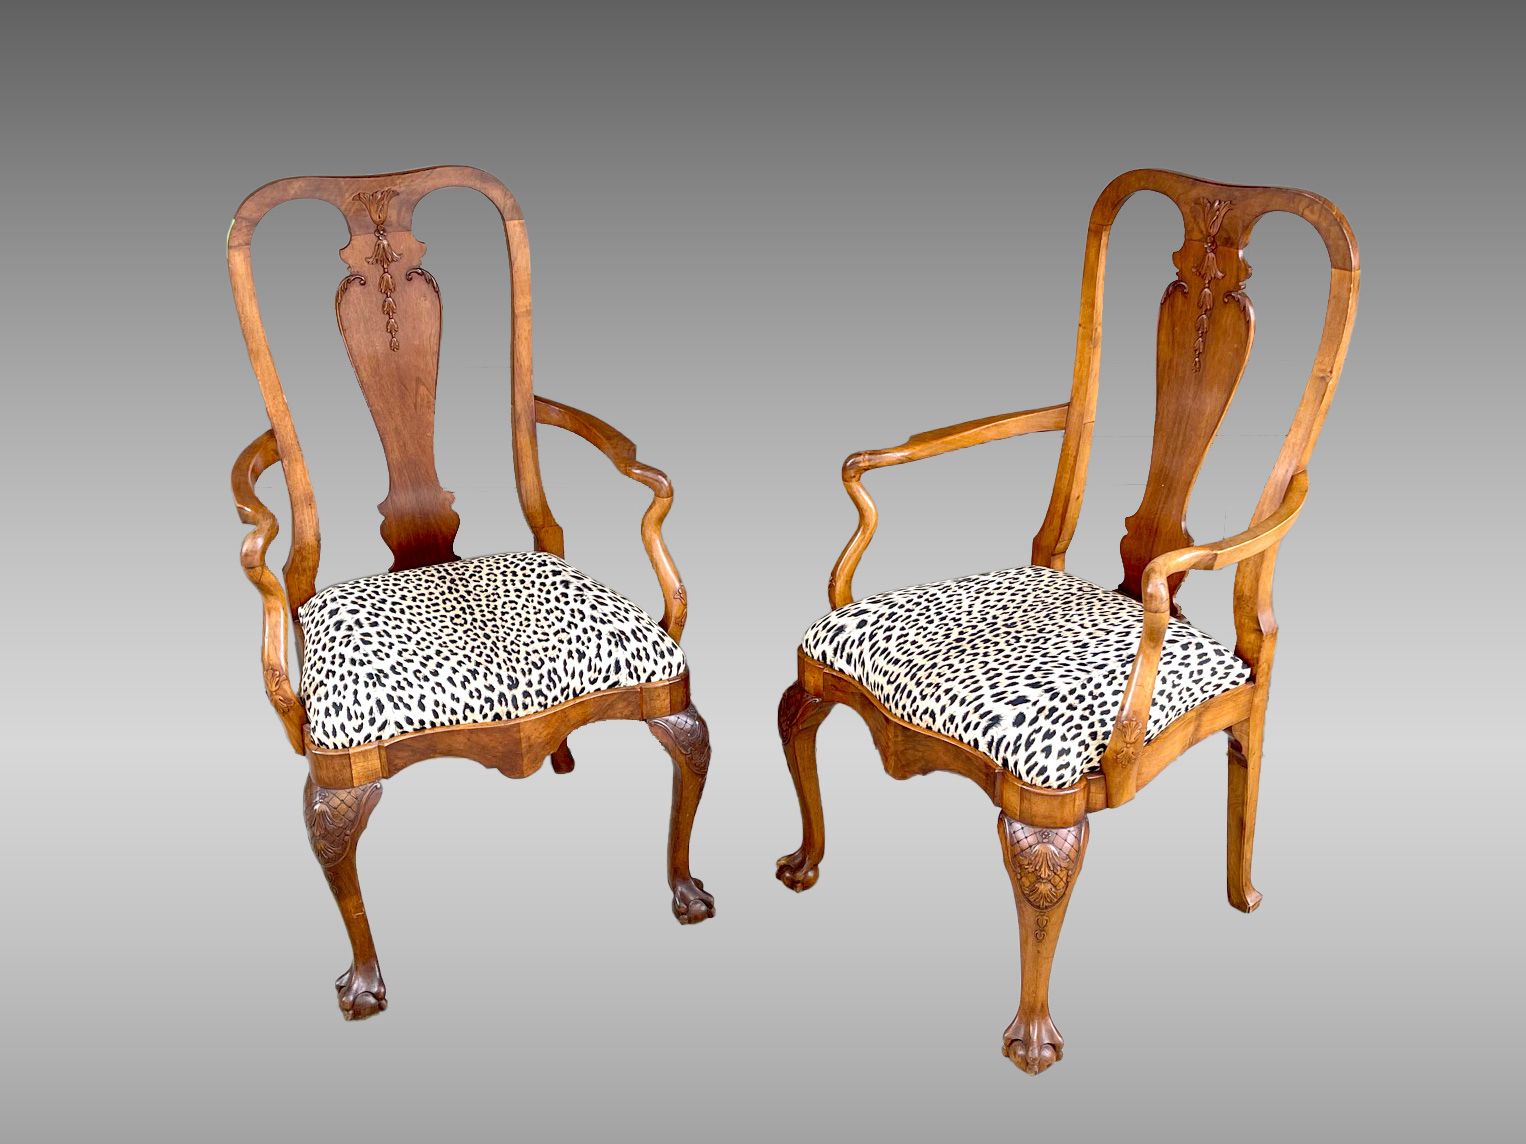 PR OF QUEEN ANNE CHAIRS WITH LEOPARD 36cc64